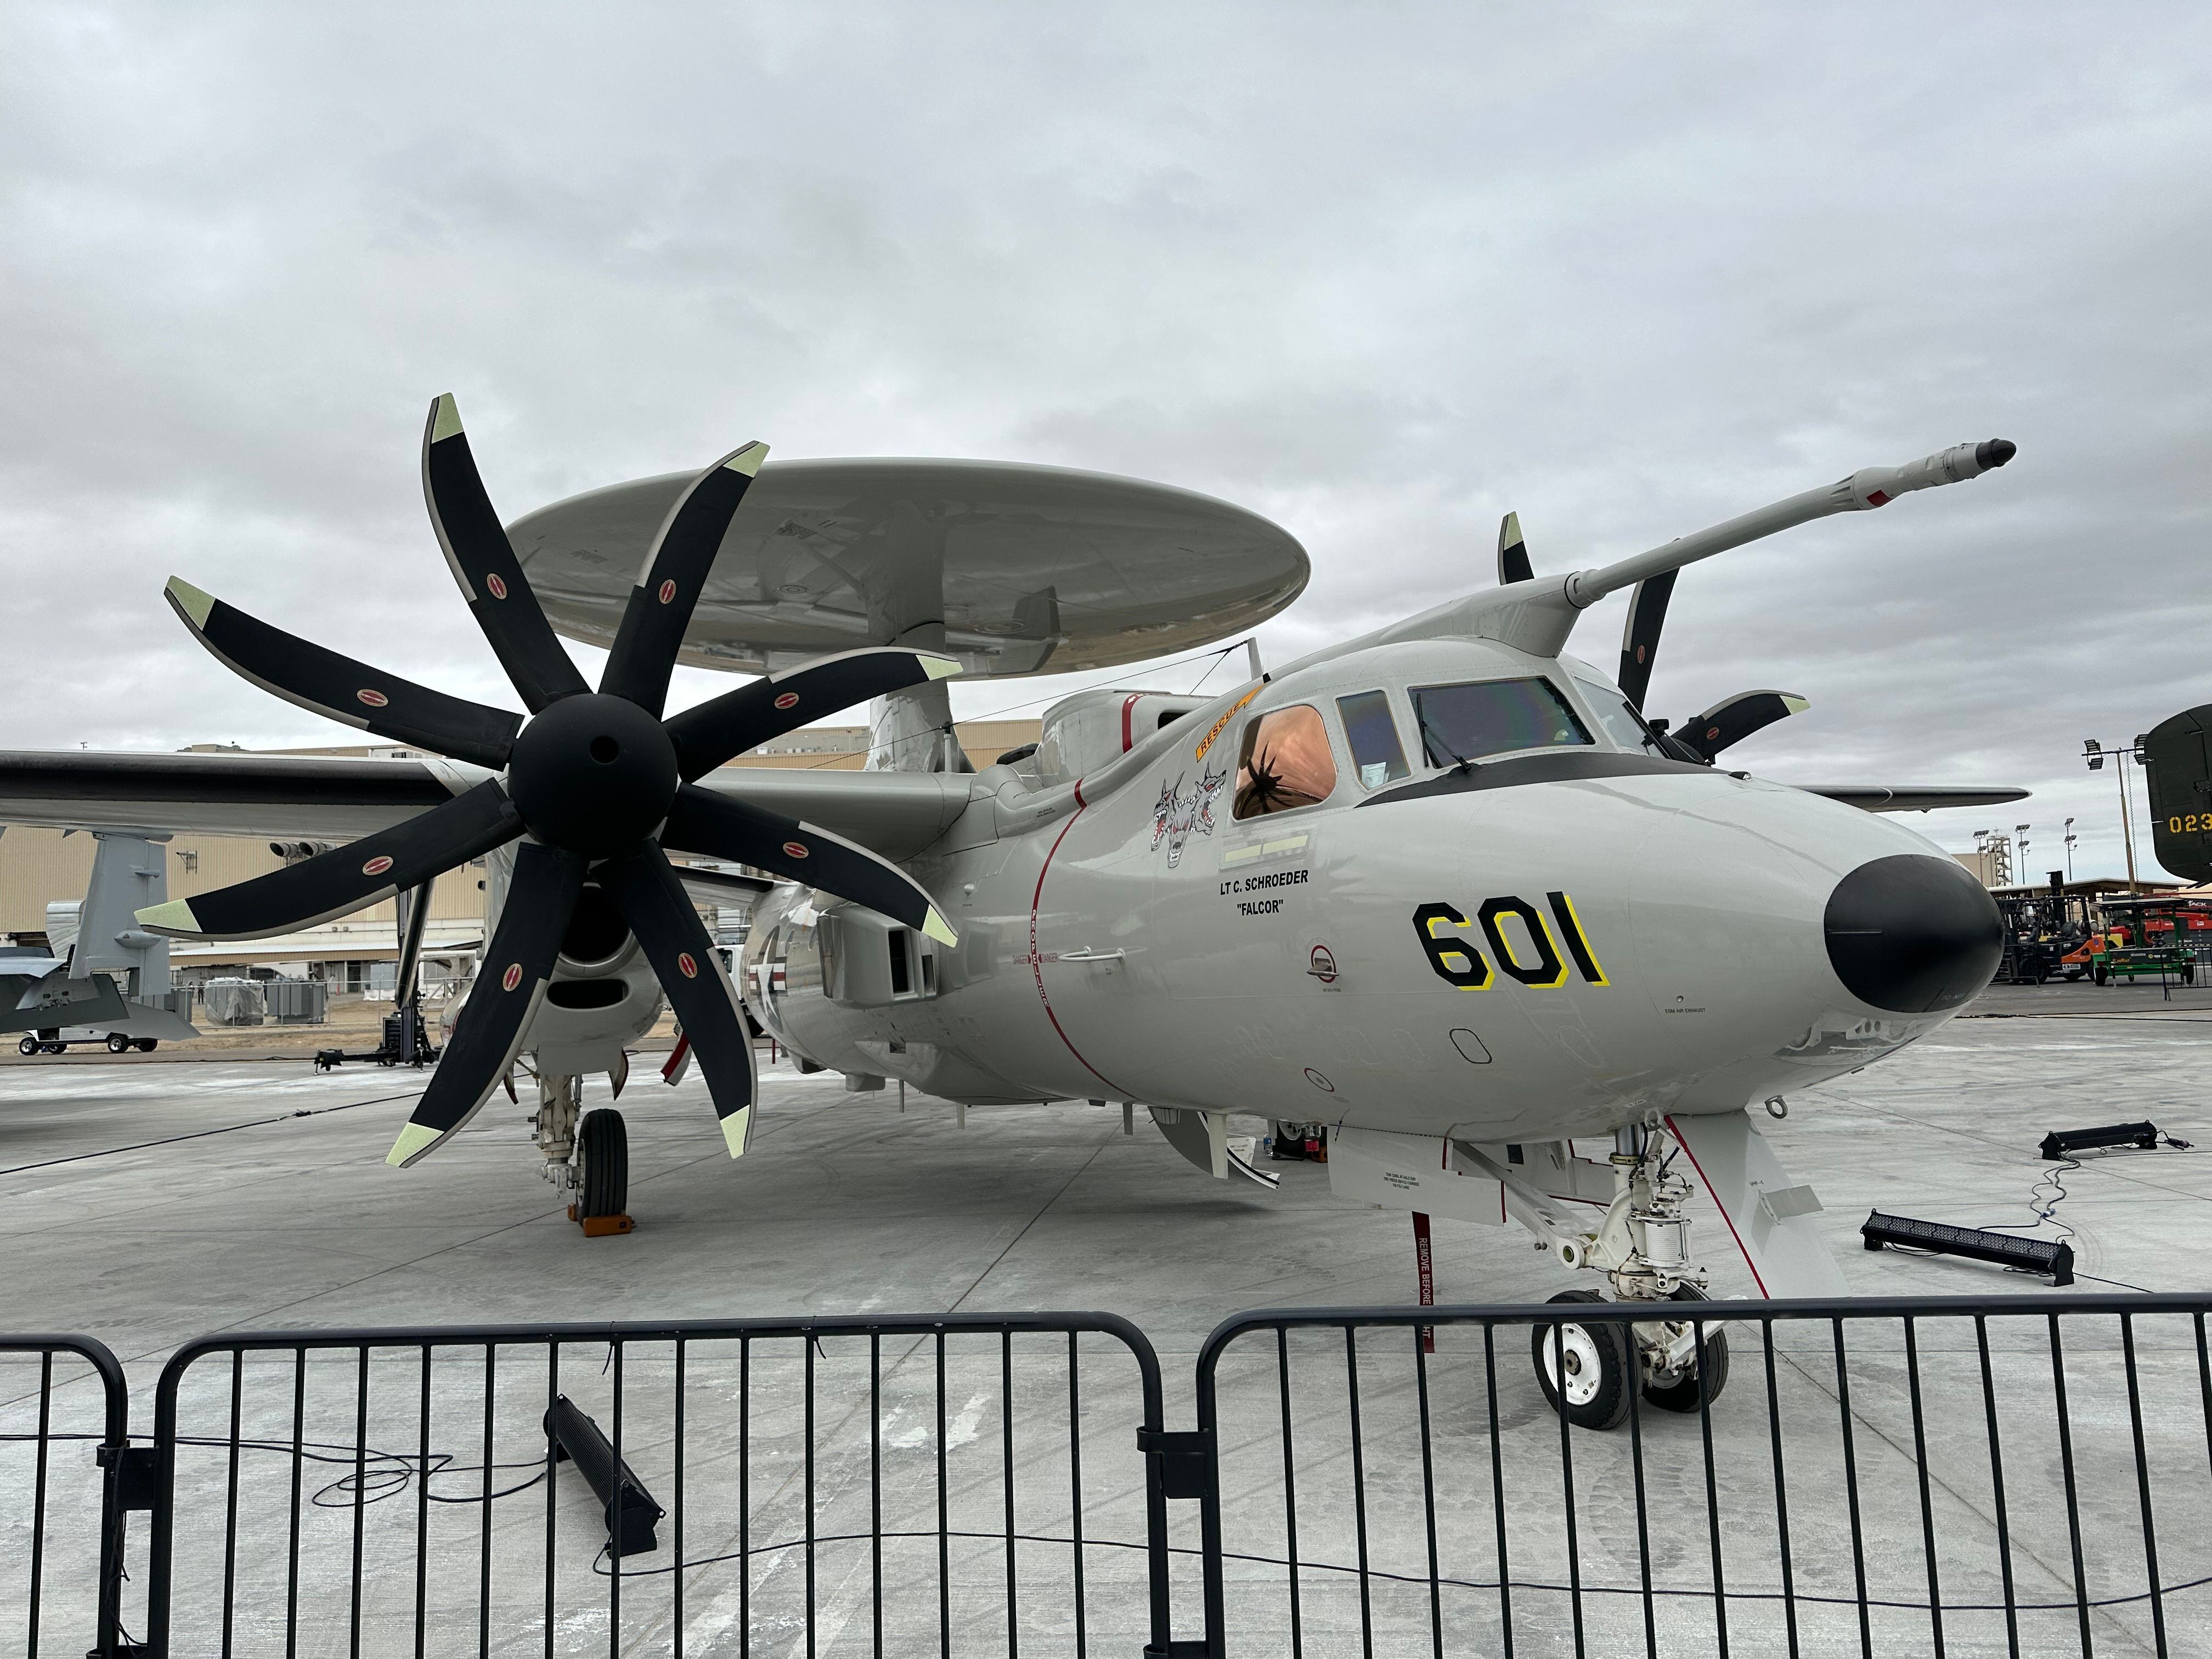 The E-2 Hawkeye, the U.S. Navy's airborne command-and-control aircraft, with its signature 24-foot-diameter radar rotodome. (Stephen Losey/Staff)